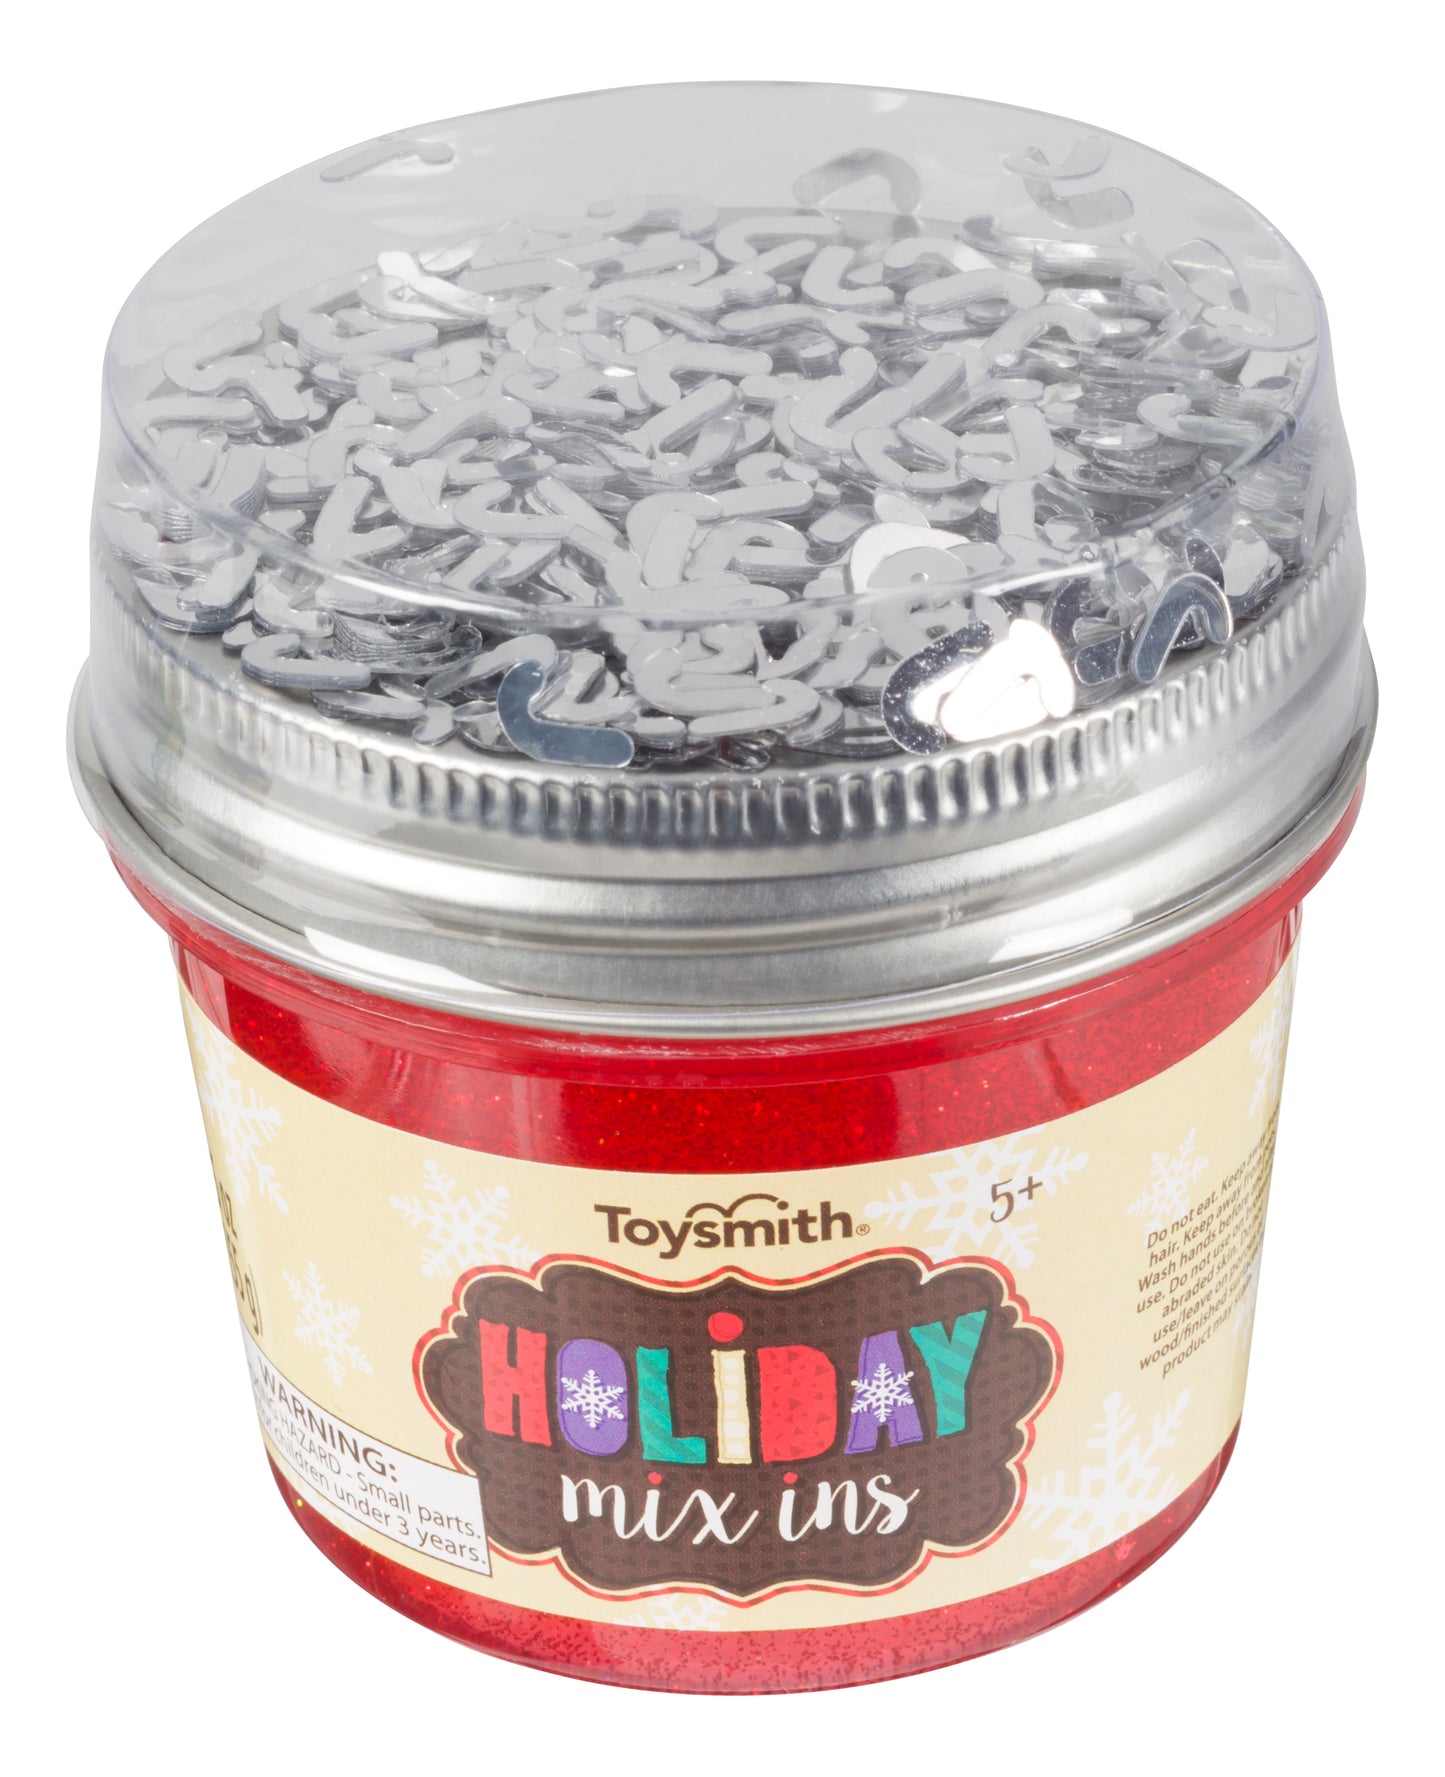 Toysmith Holiday Mix In Slime